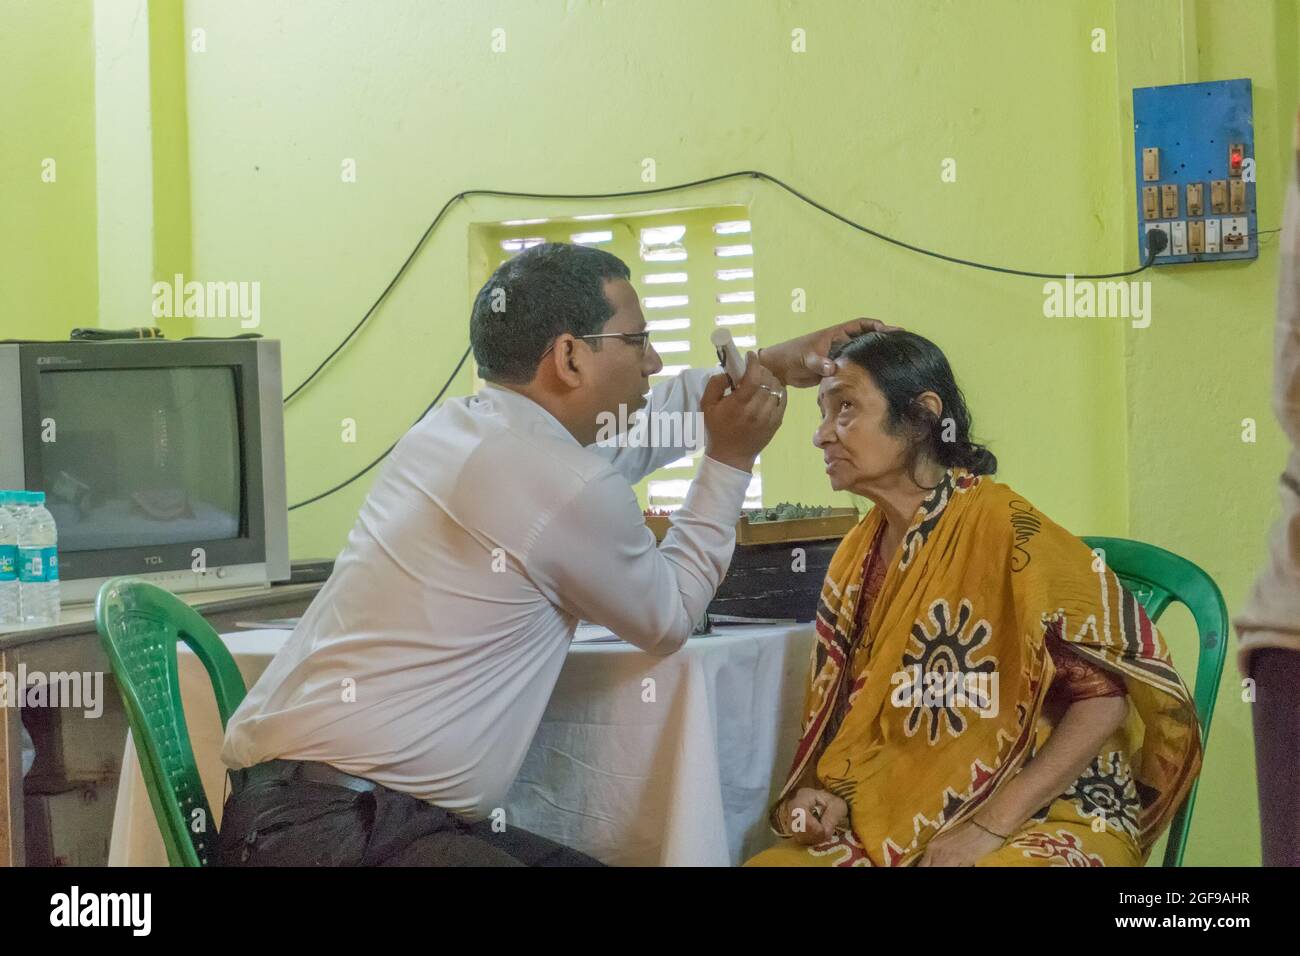 KOLKATA , INDIA - MARCH 19, 2017 : Male Doctor eye specialist checking eye sight of adult female sitting on a chair, at a free public eye testing camp Stock Photo